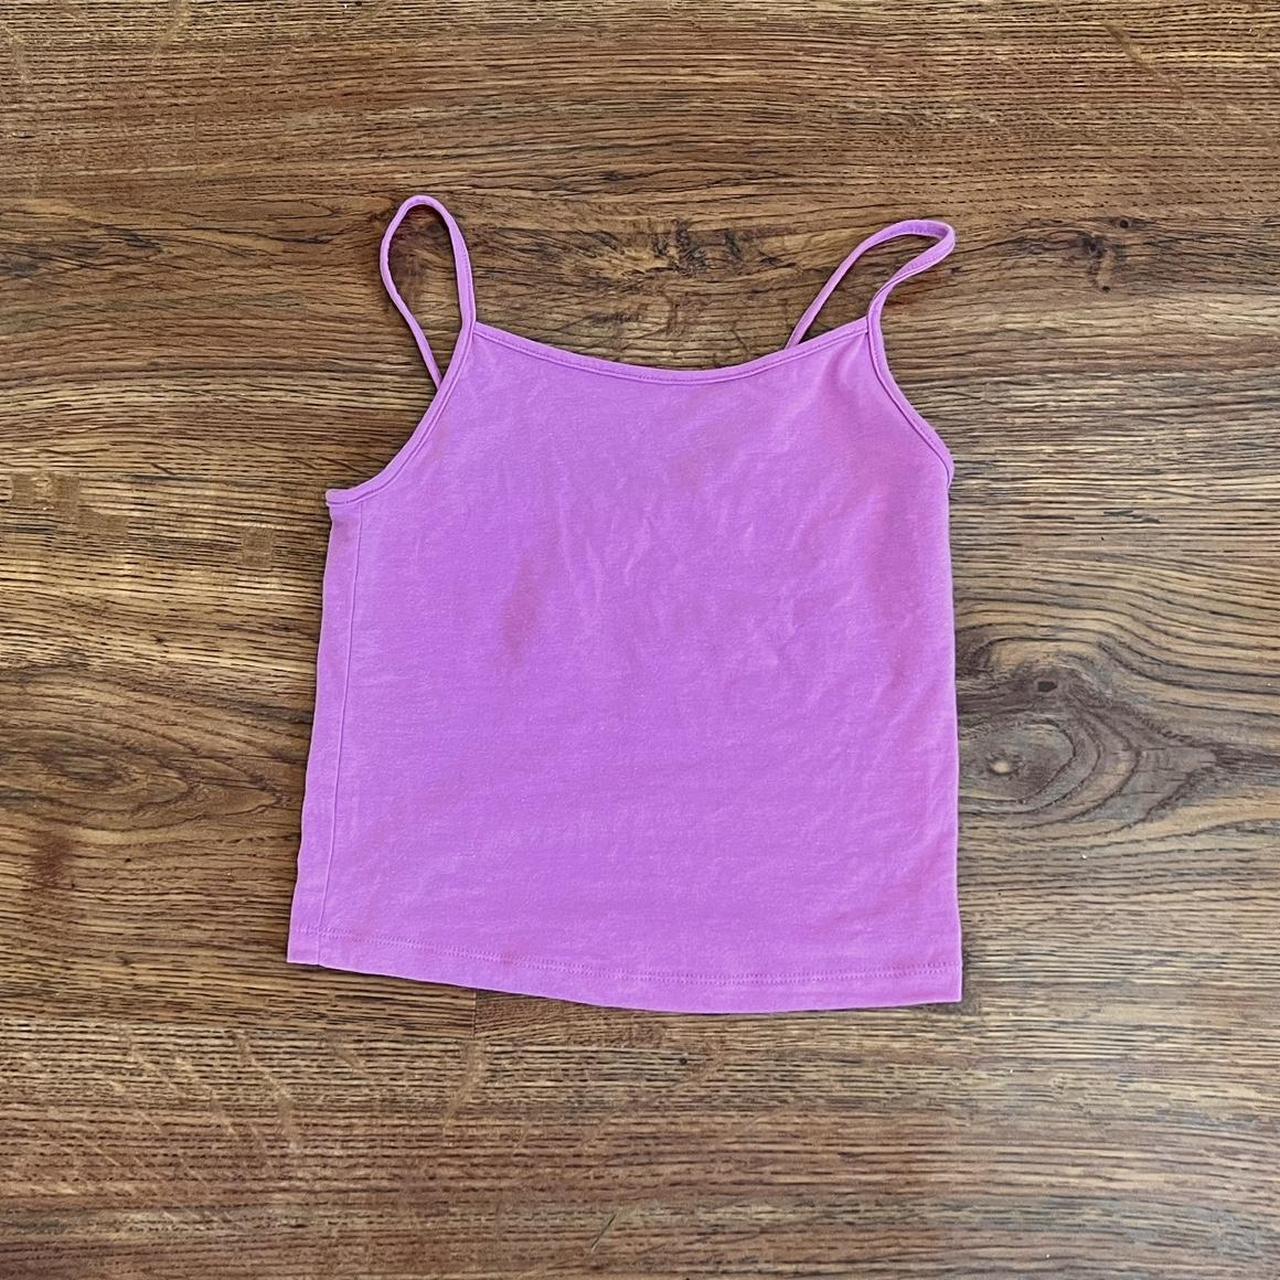 purple wild fable cami free shipping #wildfable... - Depop